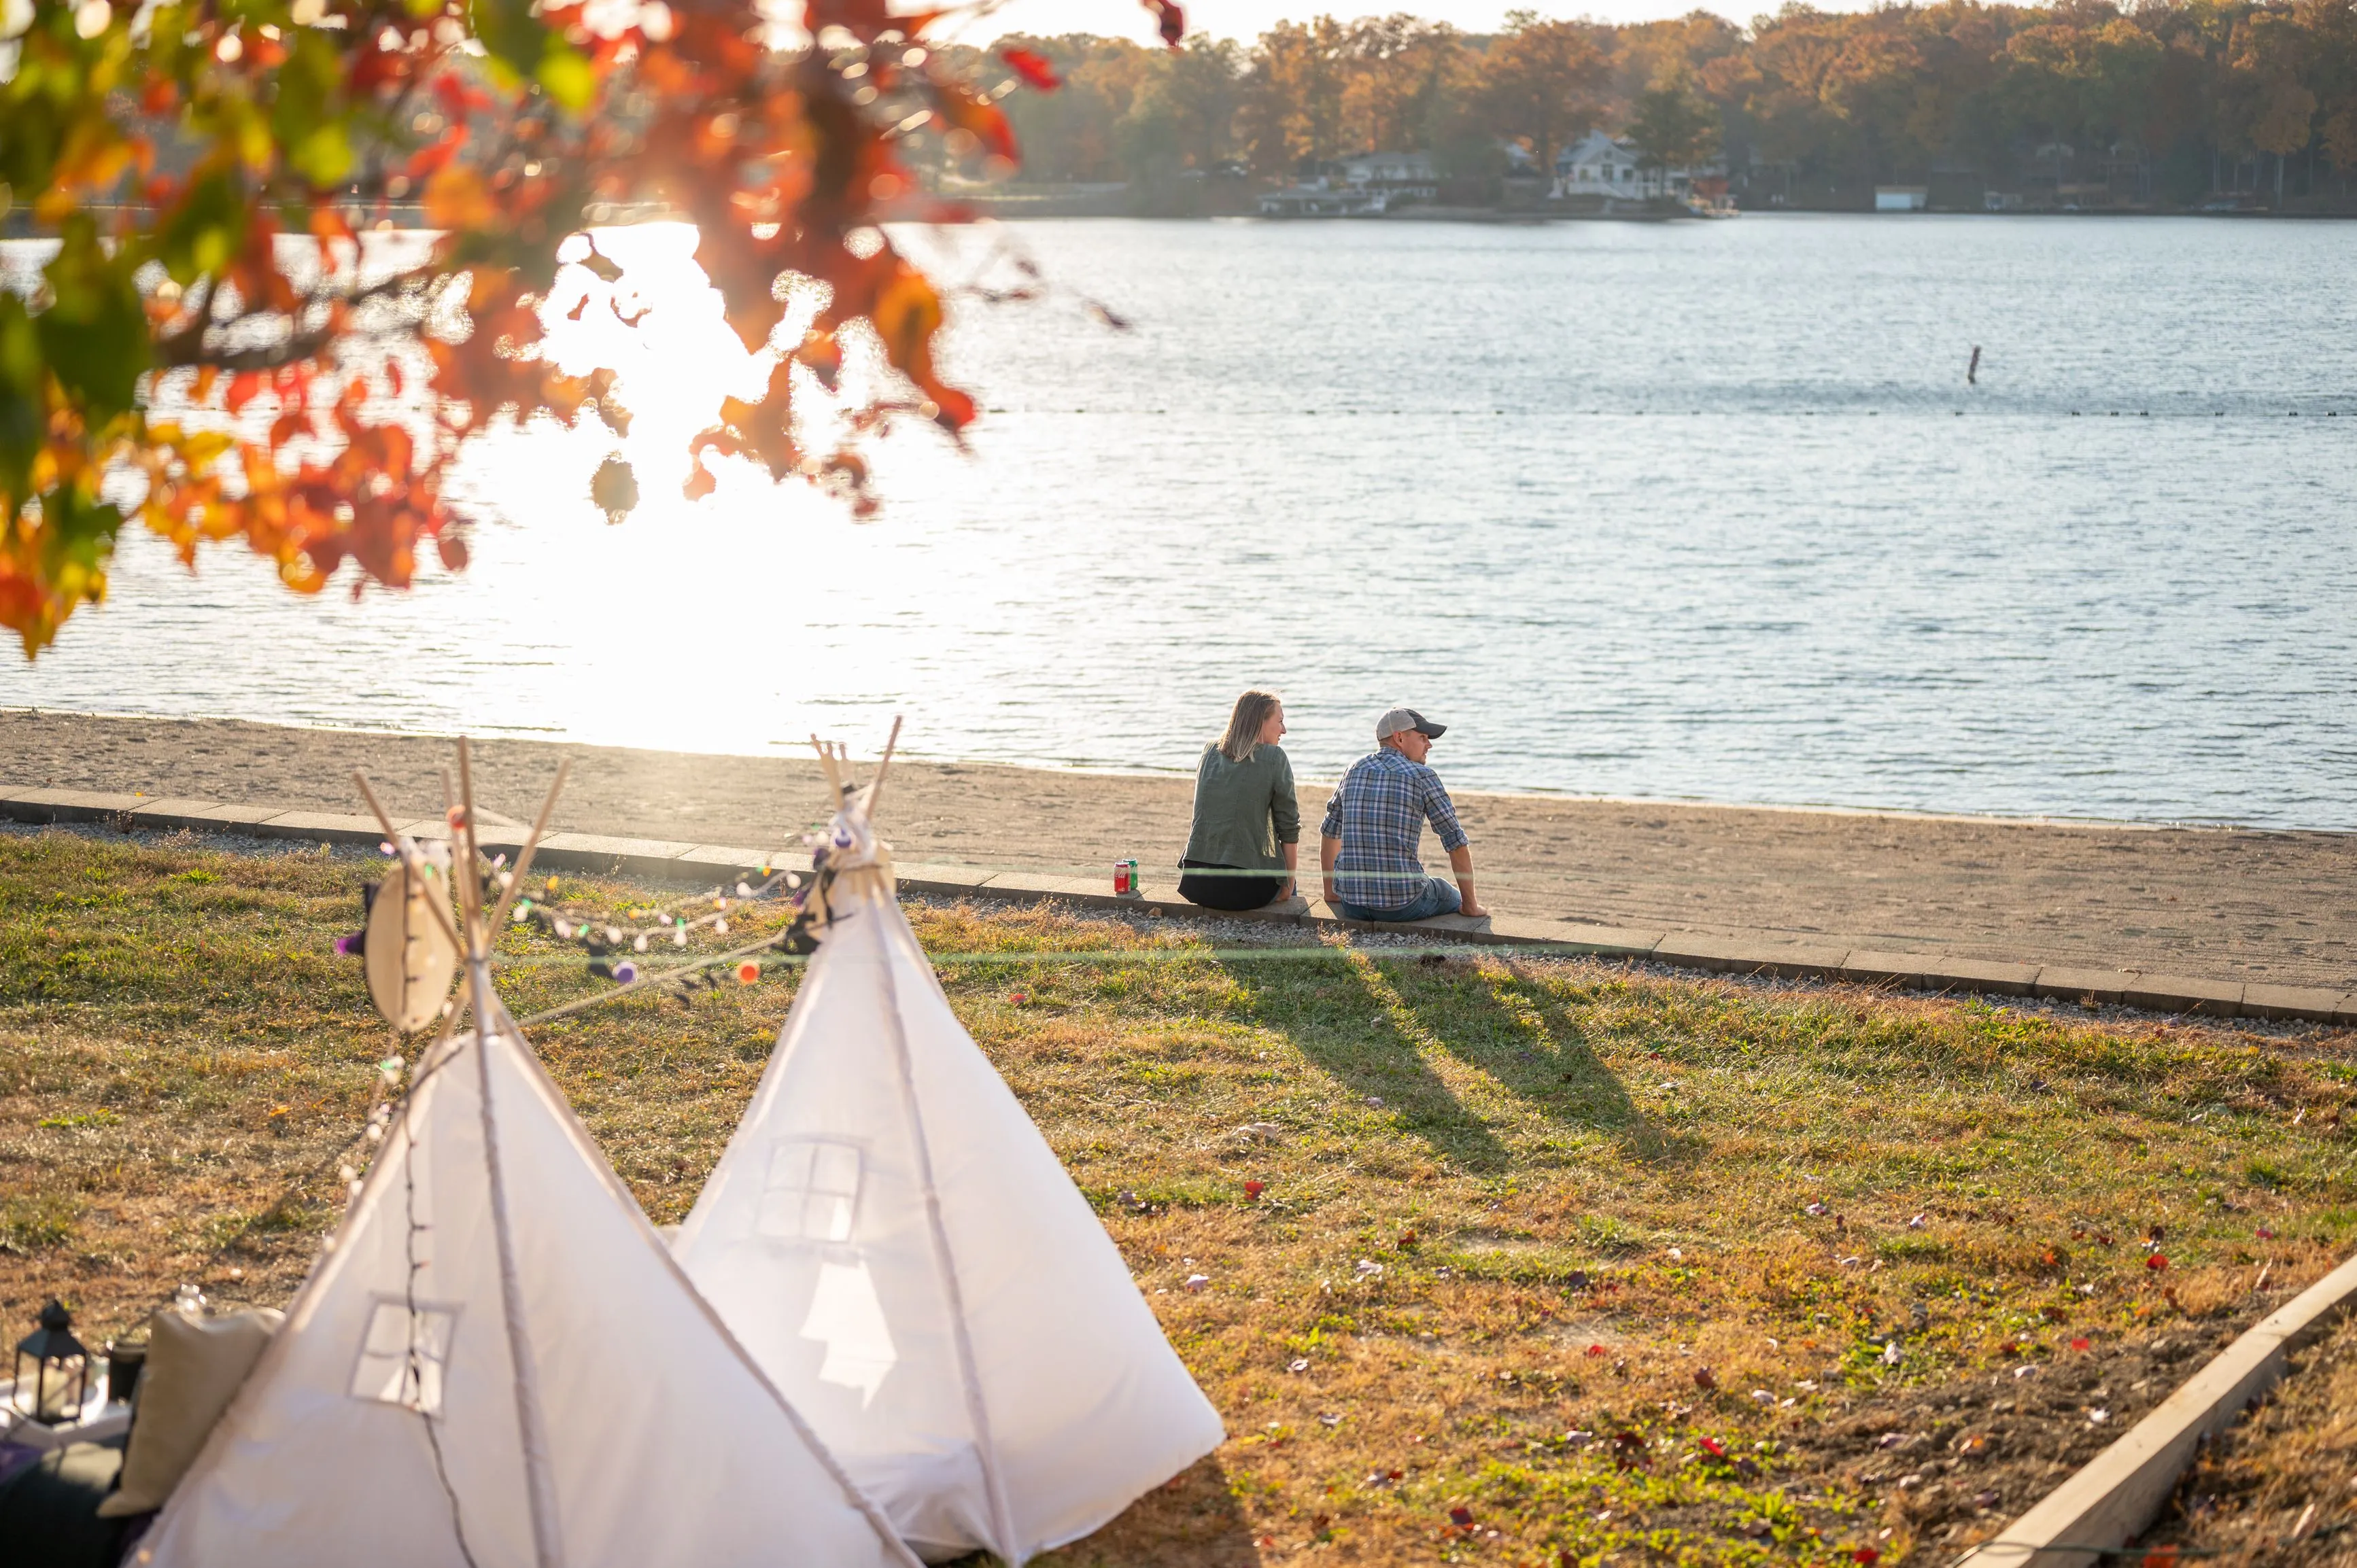 Two people sitting by the lake with small white tents and autumn leaves in the foreground.